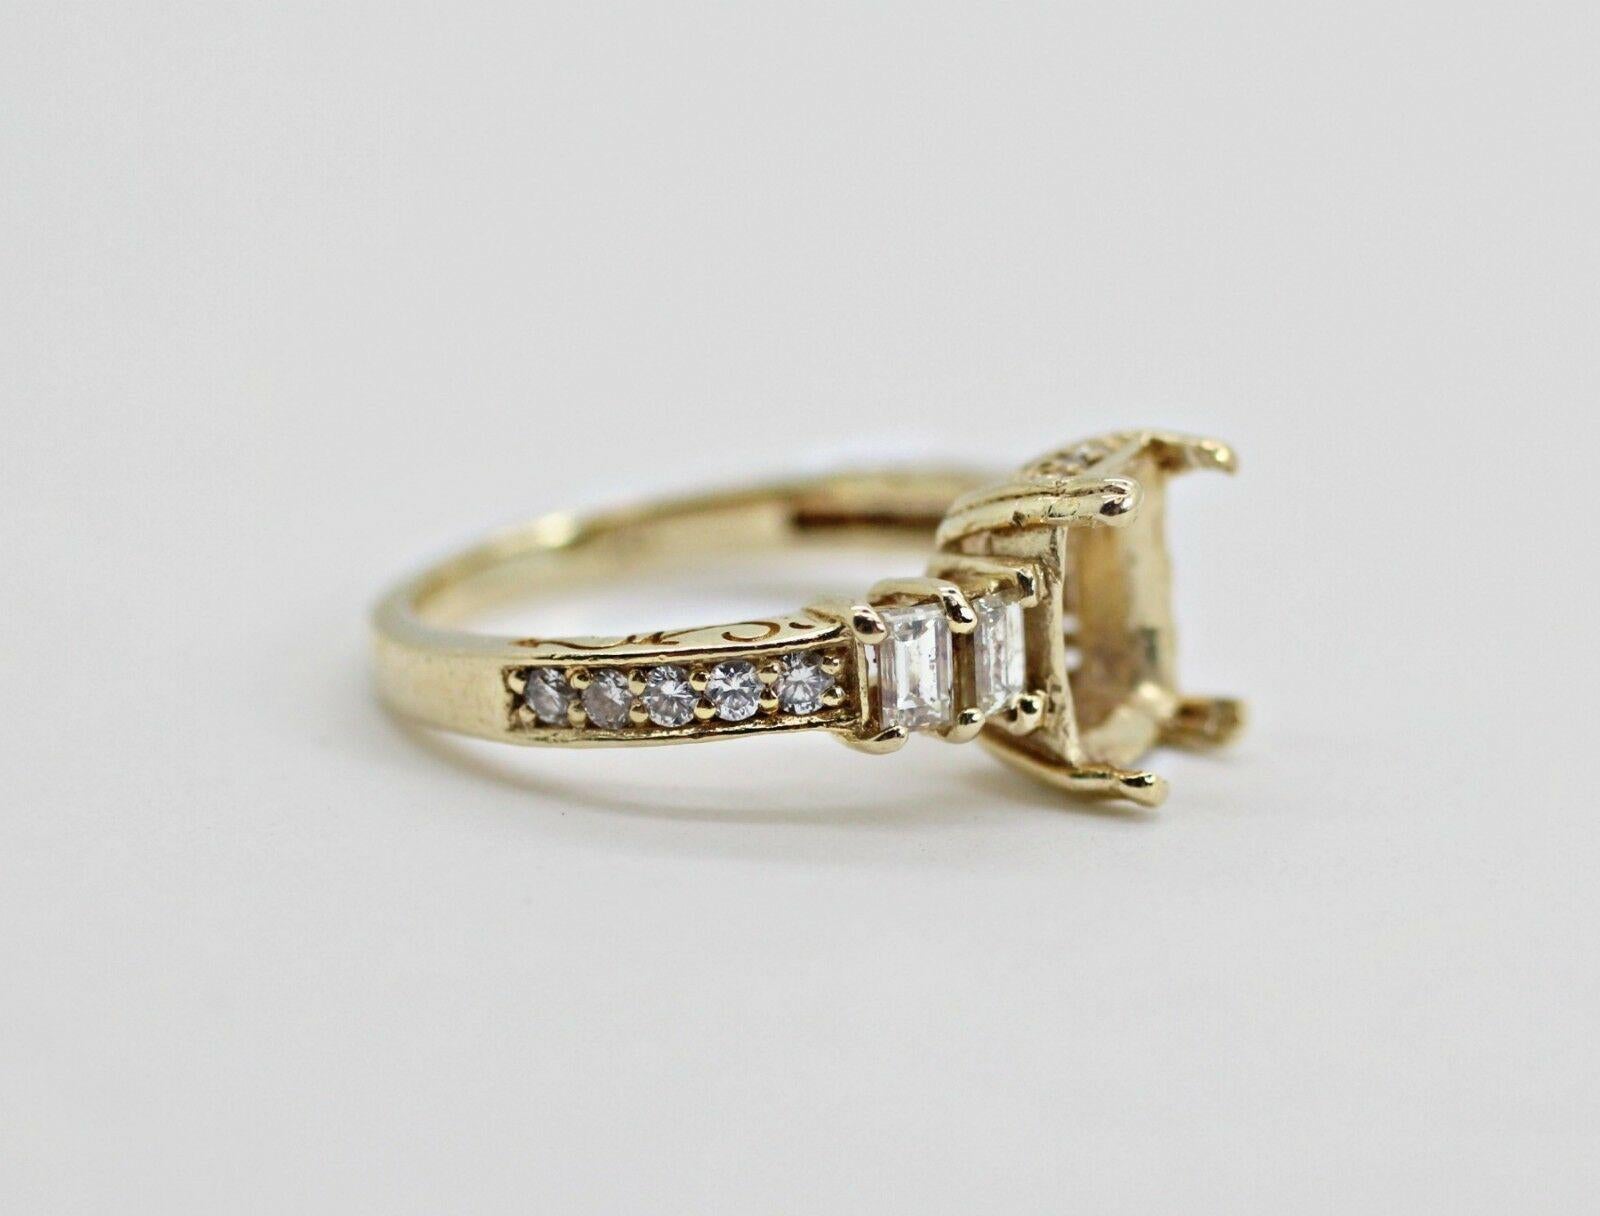 Contemporary Vintage 14 Karat Yellow Gold Ring with Approximately 0.45 Carat Total Weight